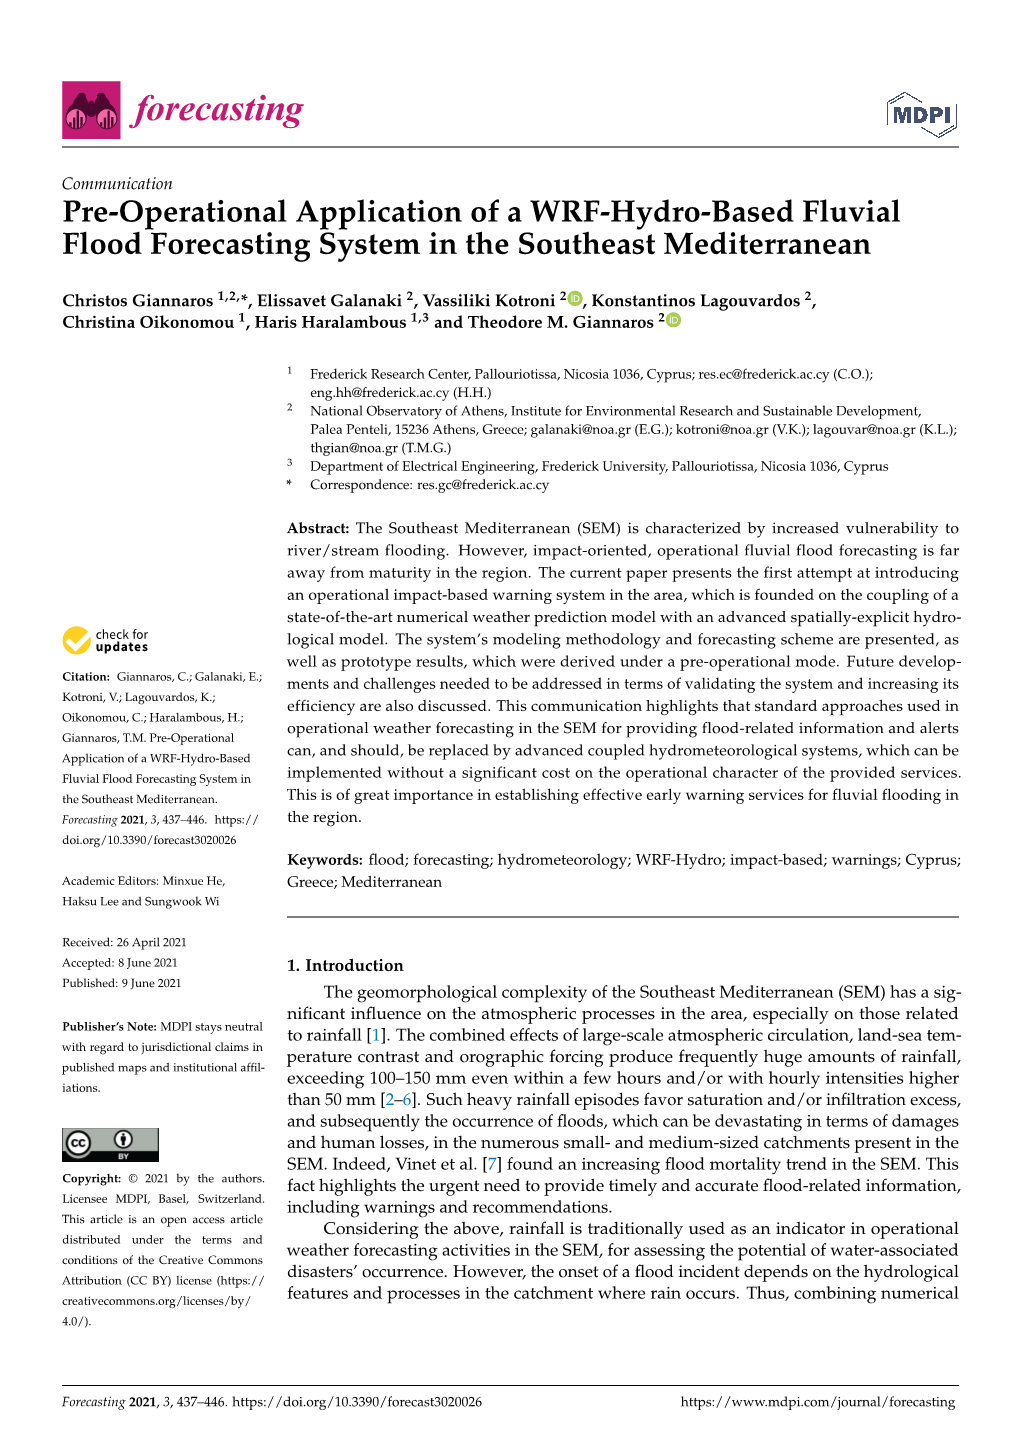 Pre-Operational Application of a WRF-Hydro-Based Fluvial Flood Forecasting System in the Southeast Mediterranean